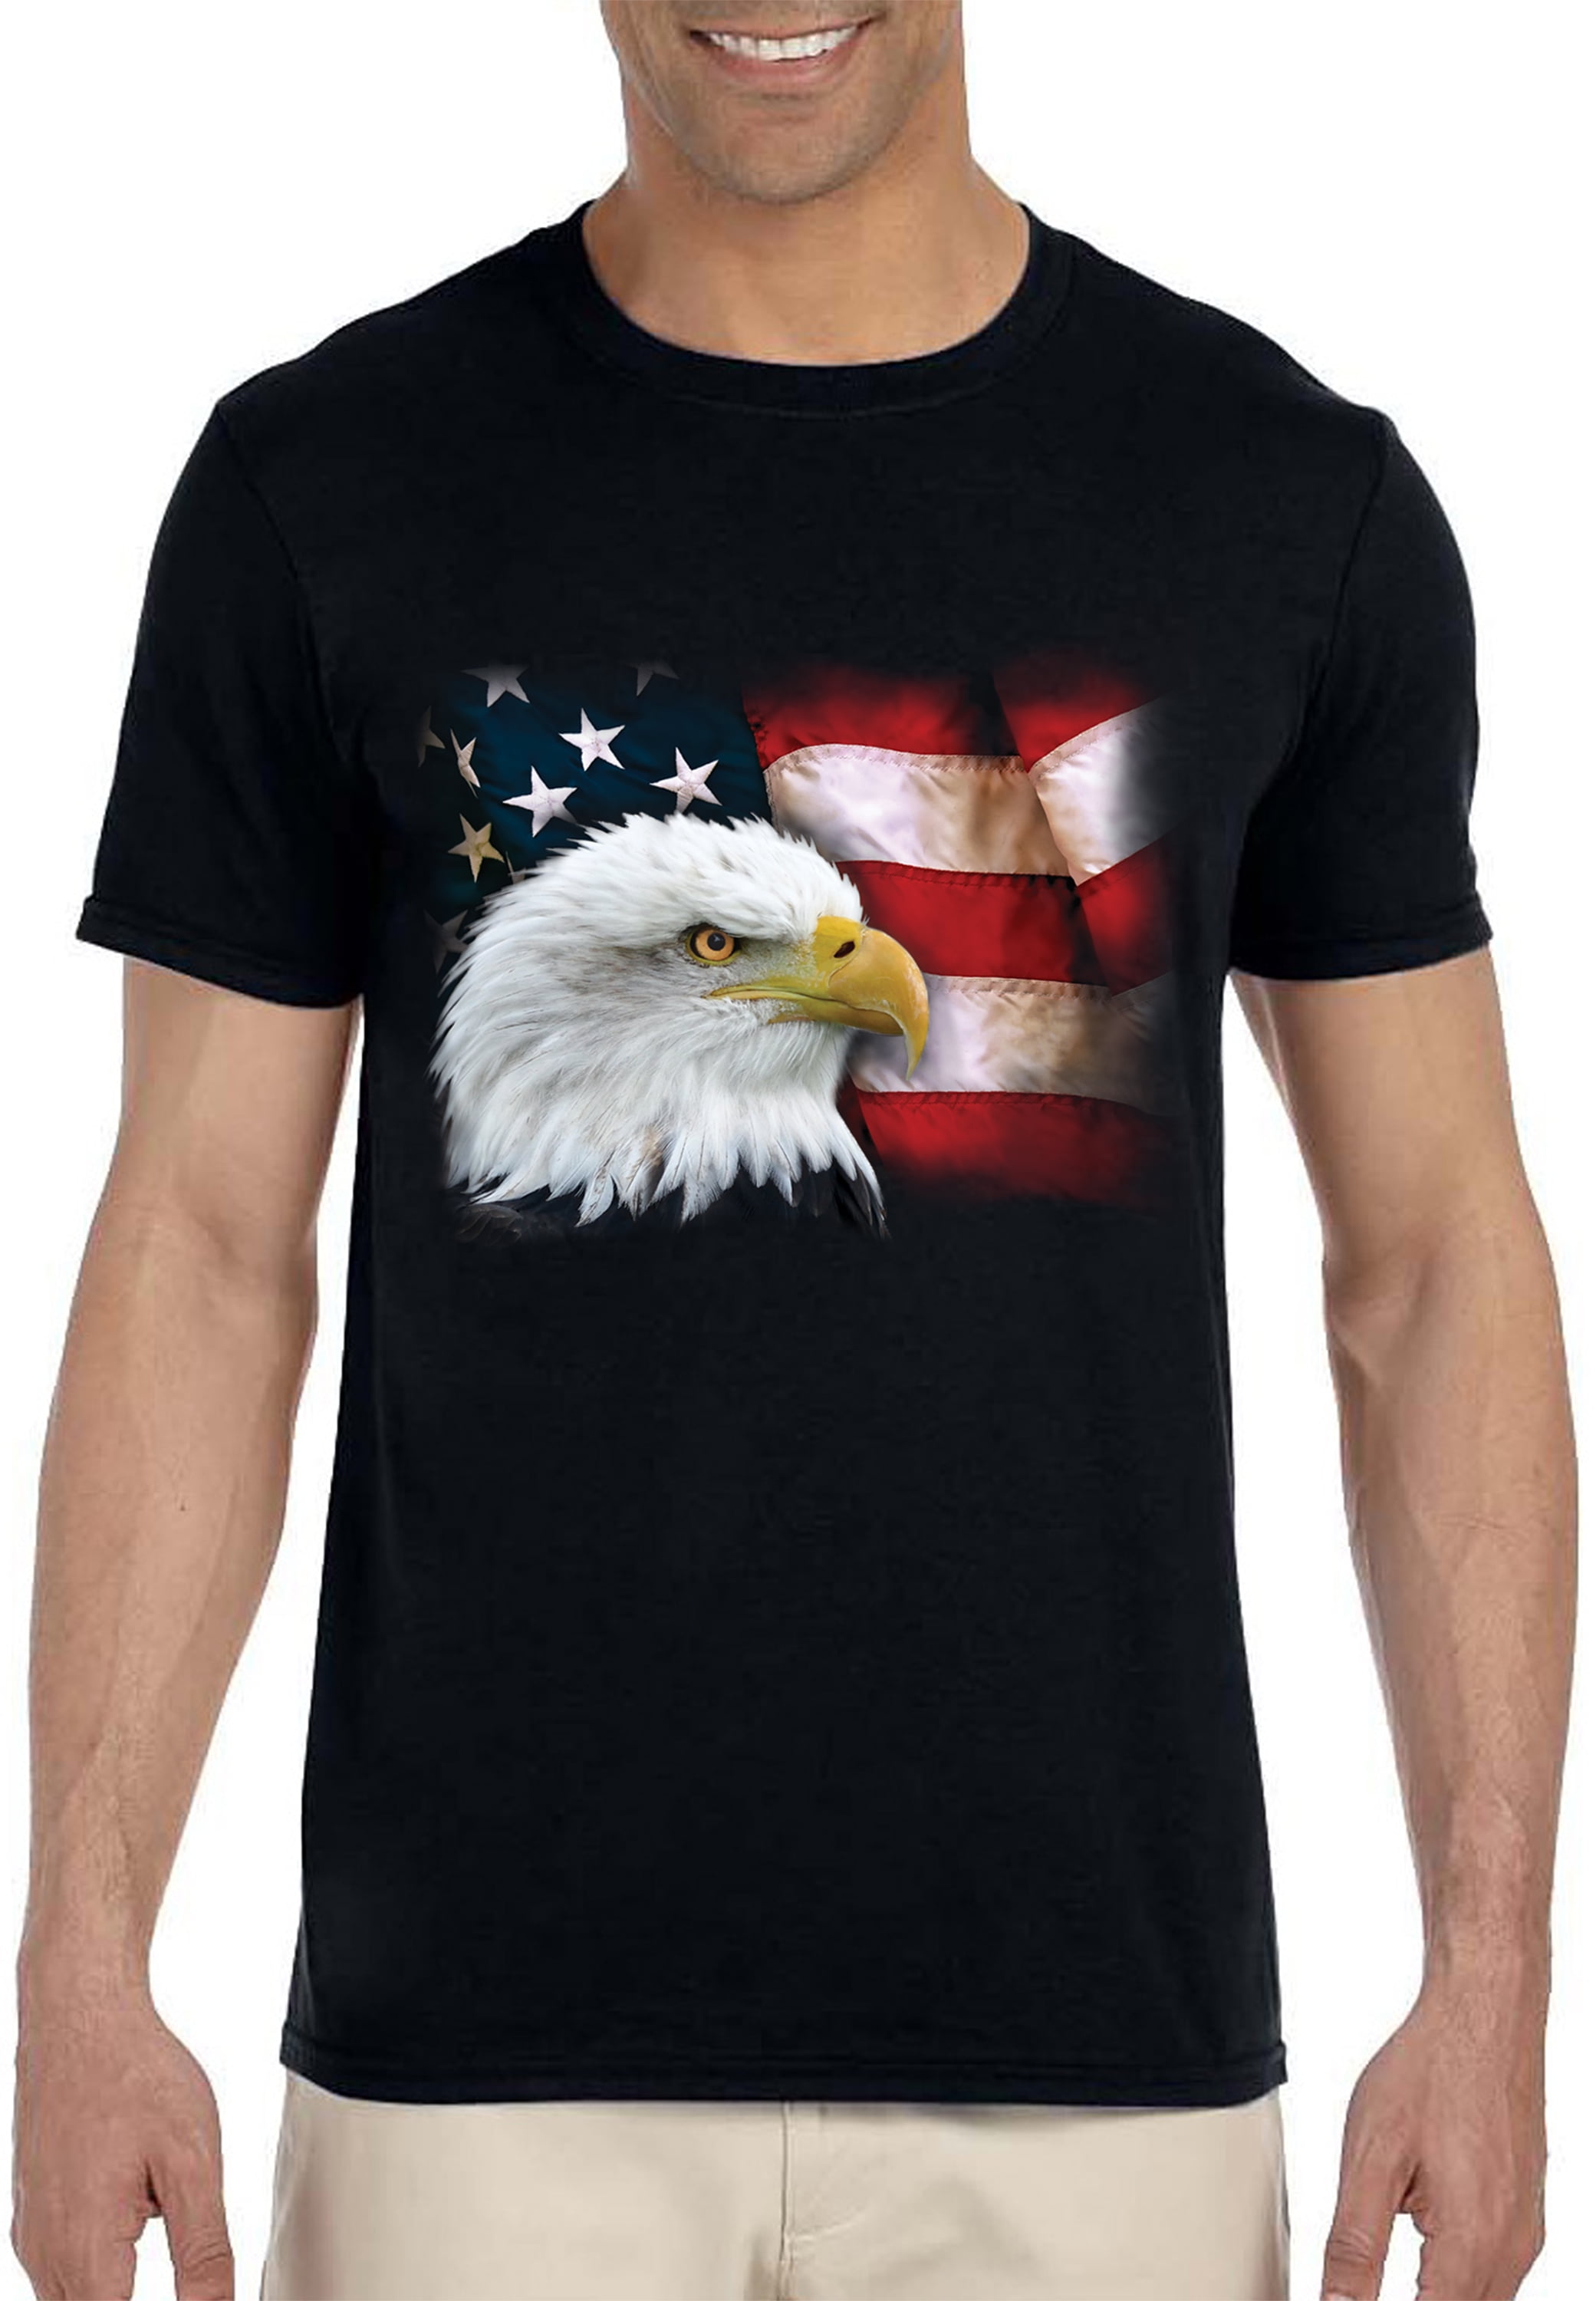 AMERICAN APPAREL MEN'S T-SHIRT SIZE 3XL BLACK AND WHITE POW AND AMERICAN  EAGLE